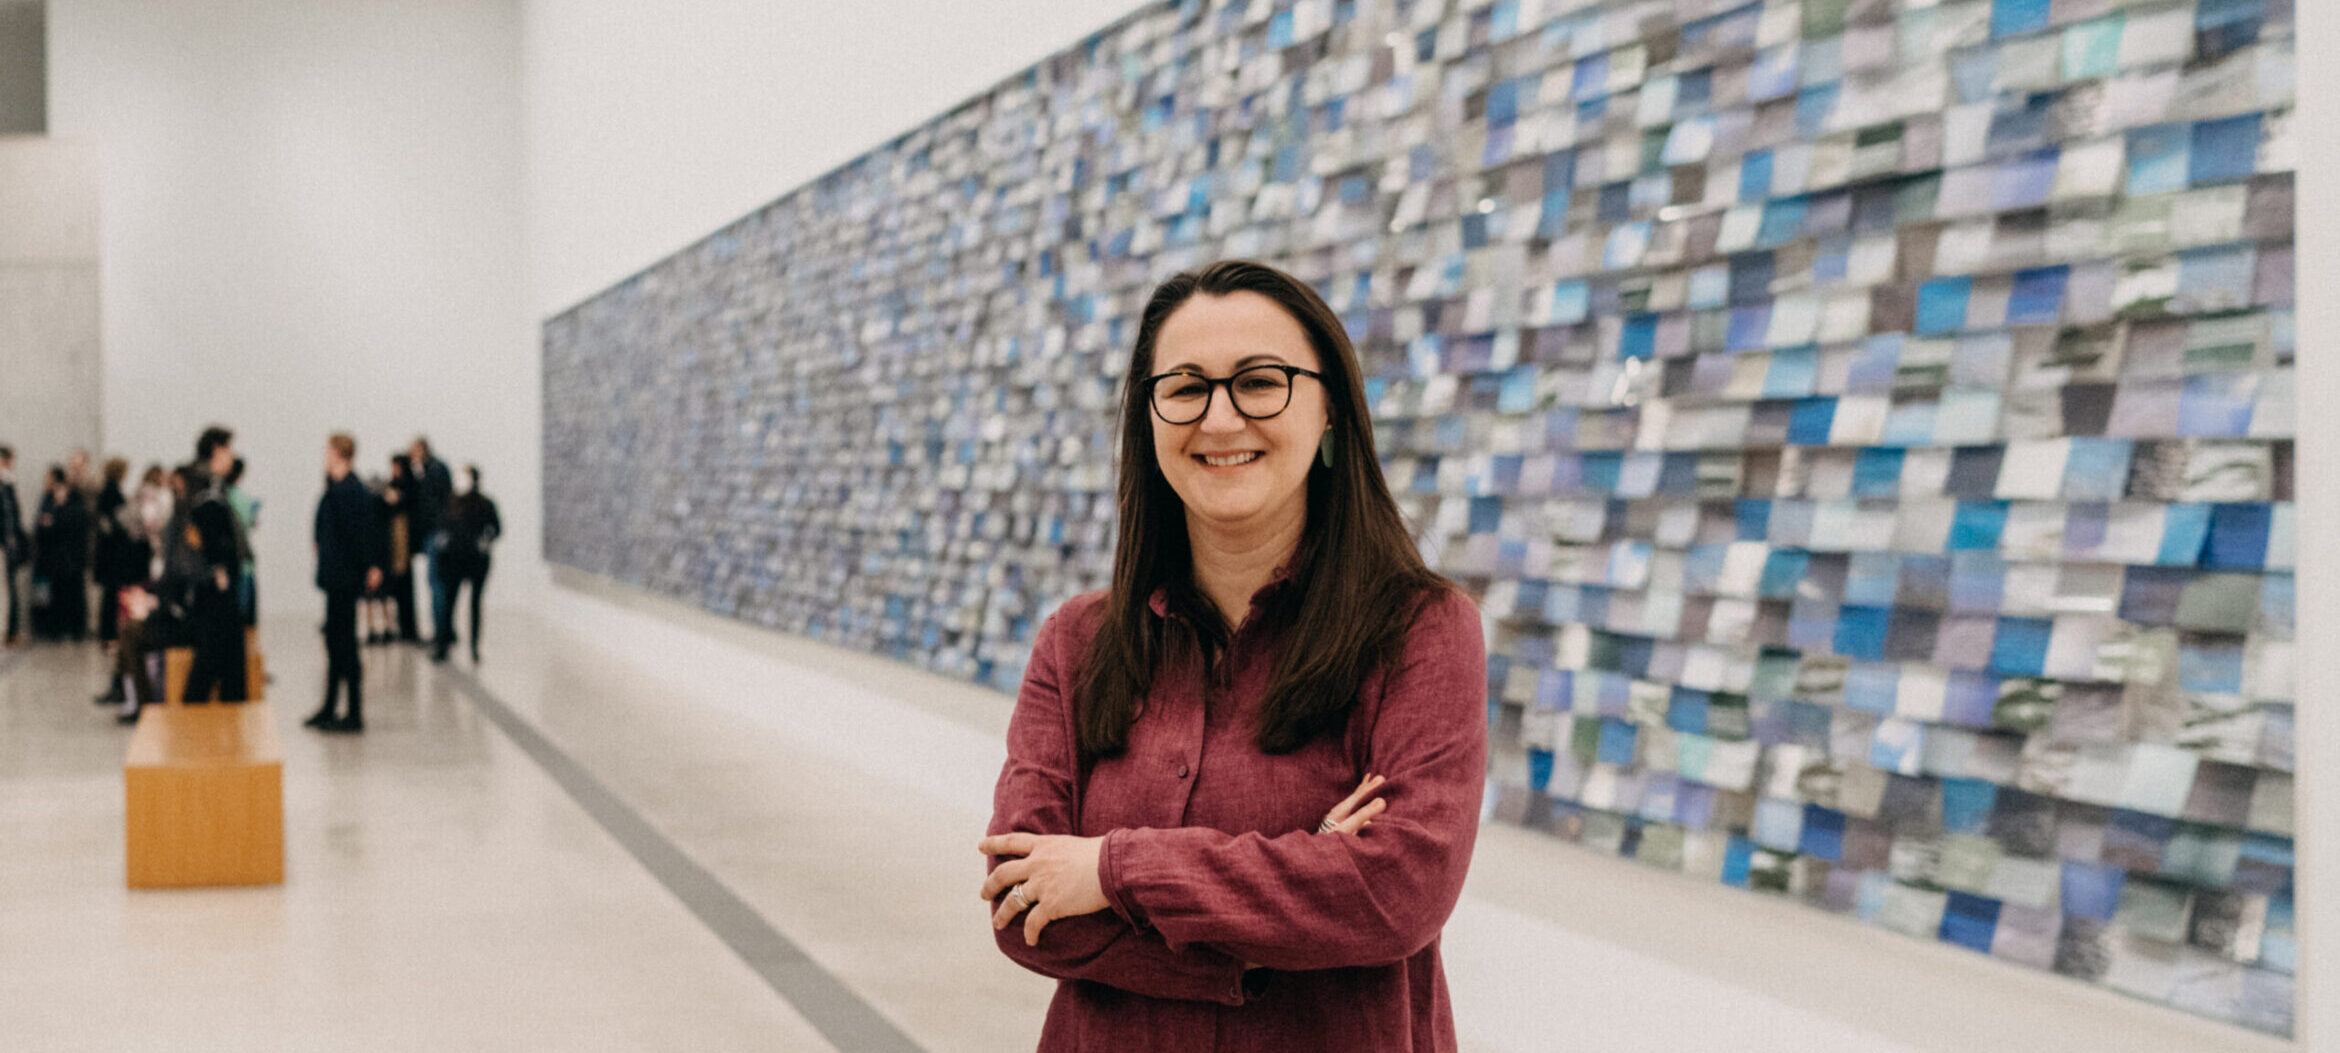 Pulitzer curator Tamara Schenkenberg wearing a red button down shirt, posing with arms crossed in front of large horizontal installation of thousands of 4x6 photographs of rivers.